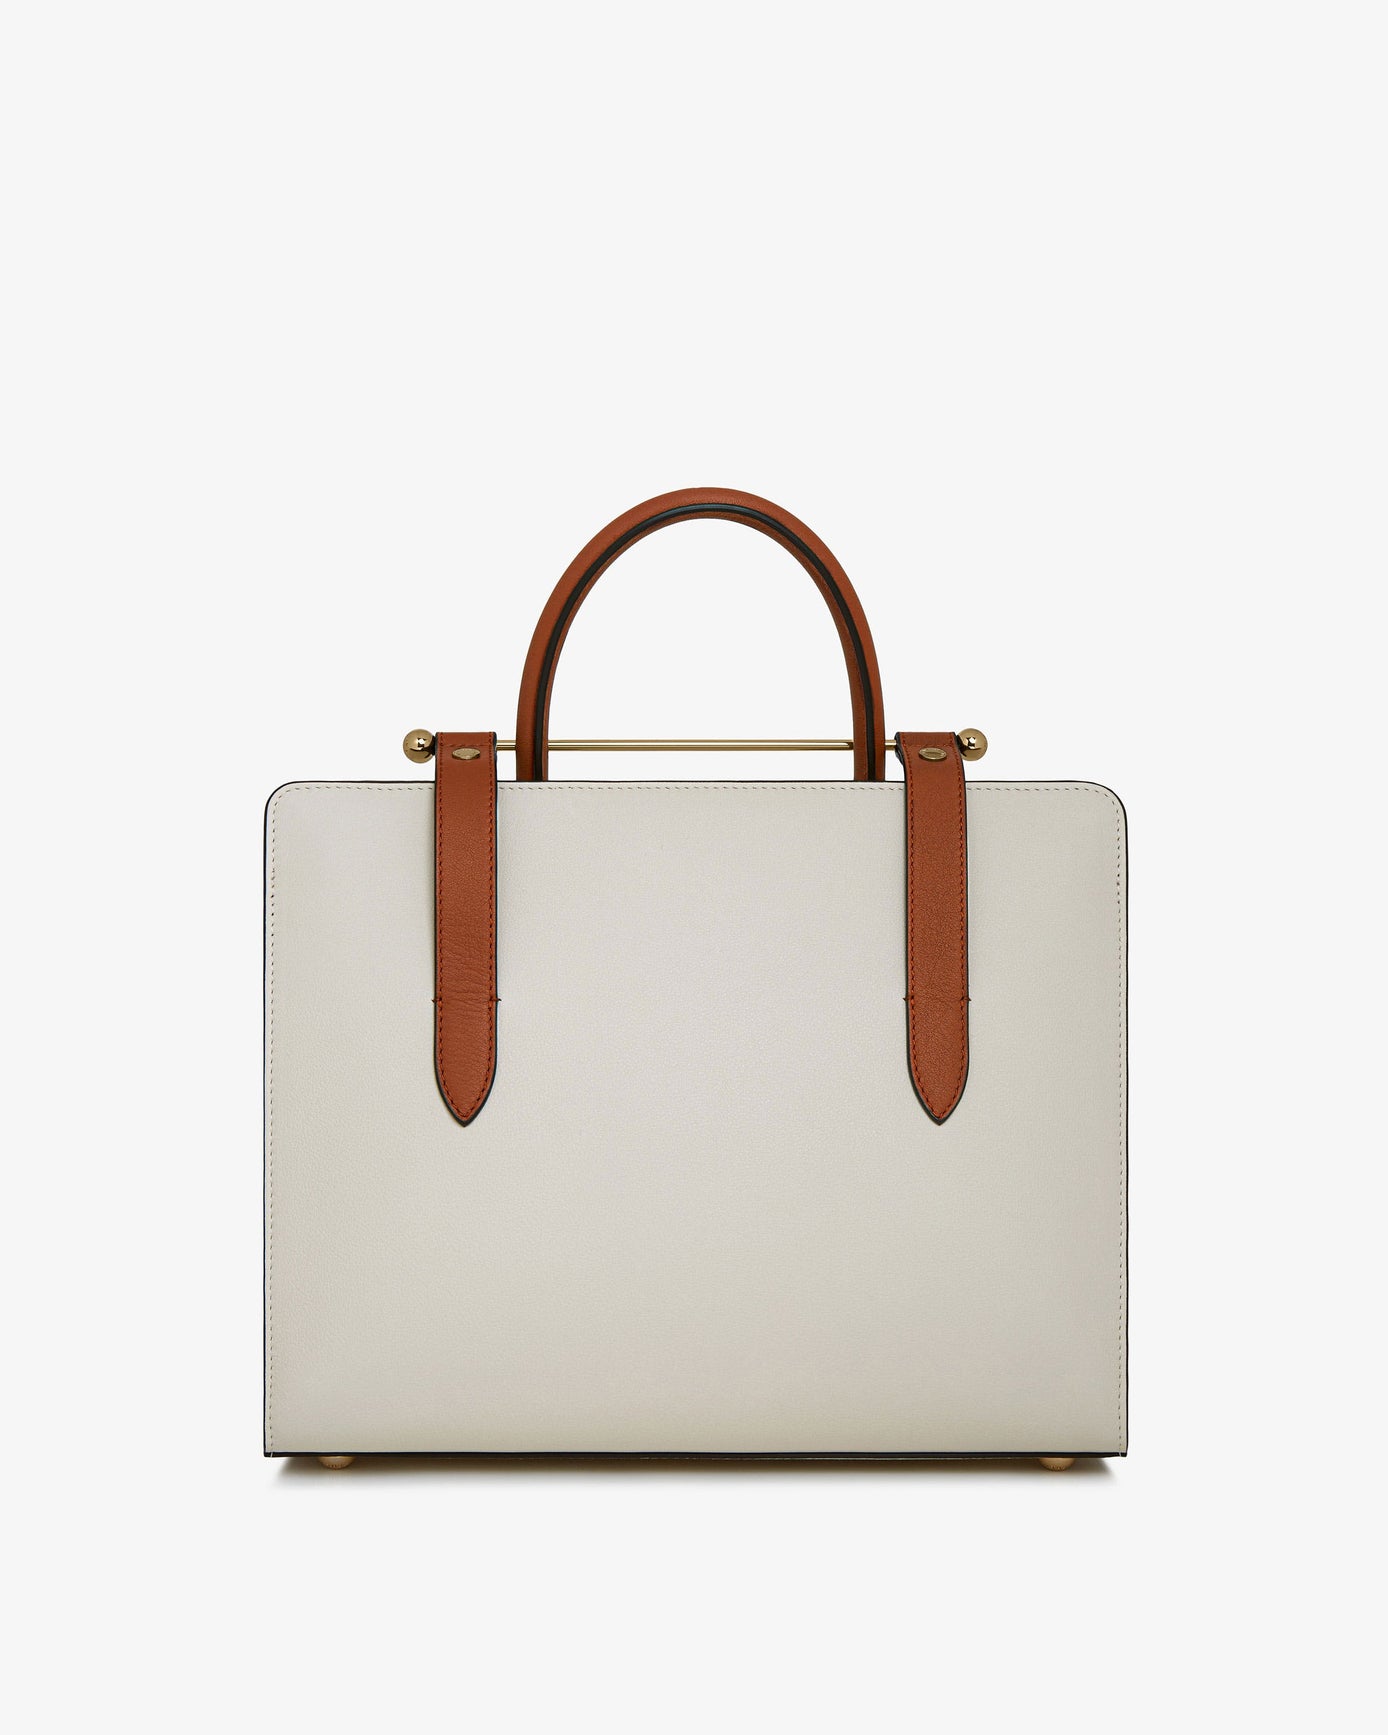 The Strathberry Midi Tote - Top Handle Leather Tote Bag - Tan / Cream ...